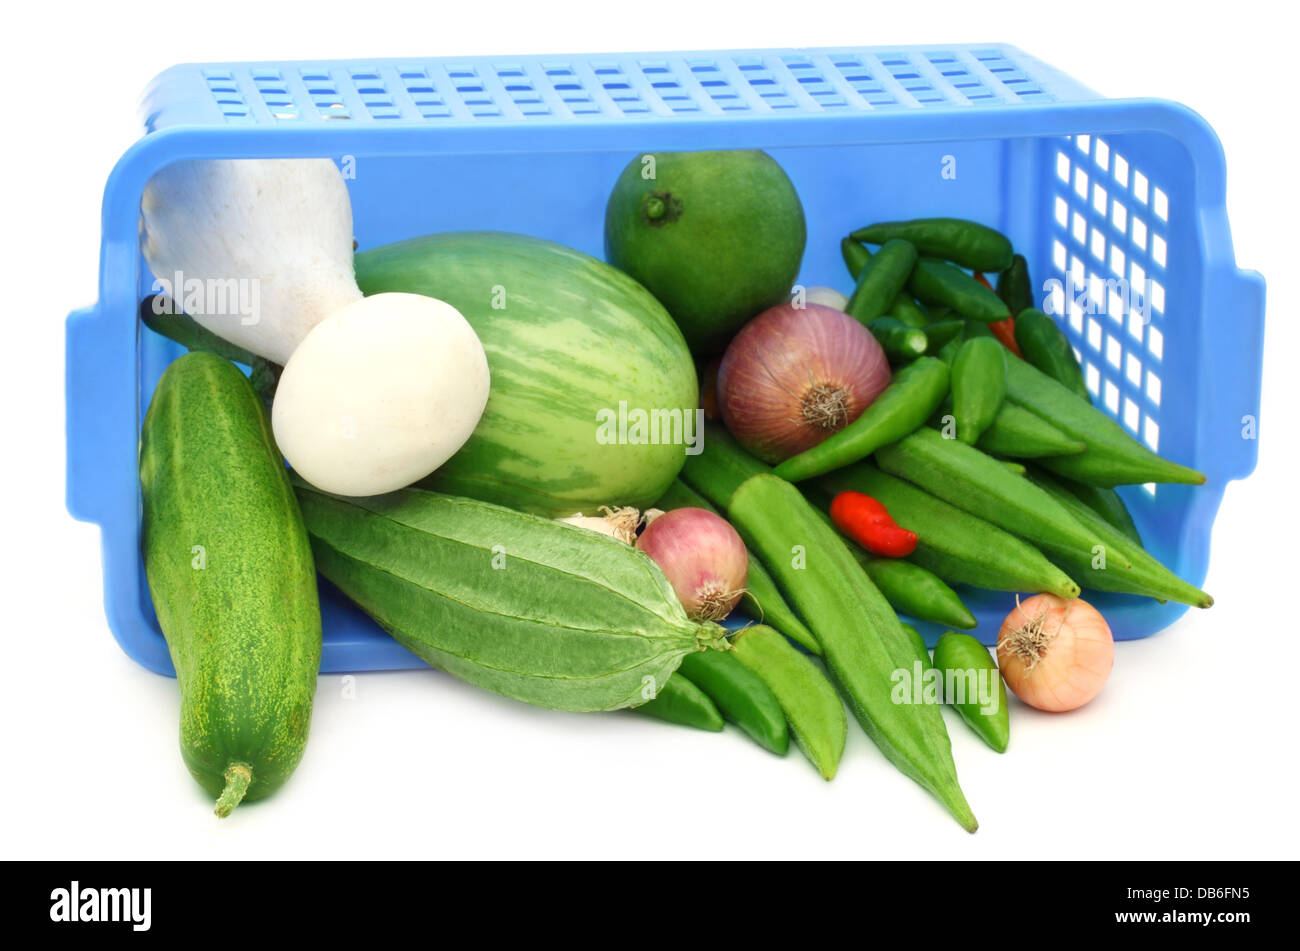 Fresh vegetables from a plastic basket Stock Photo